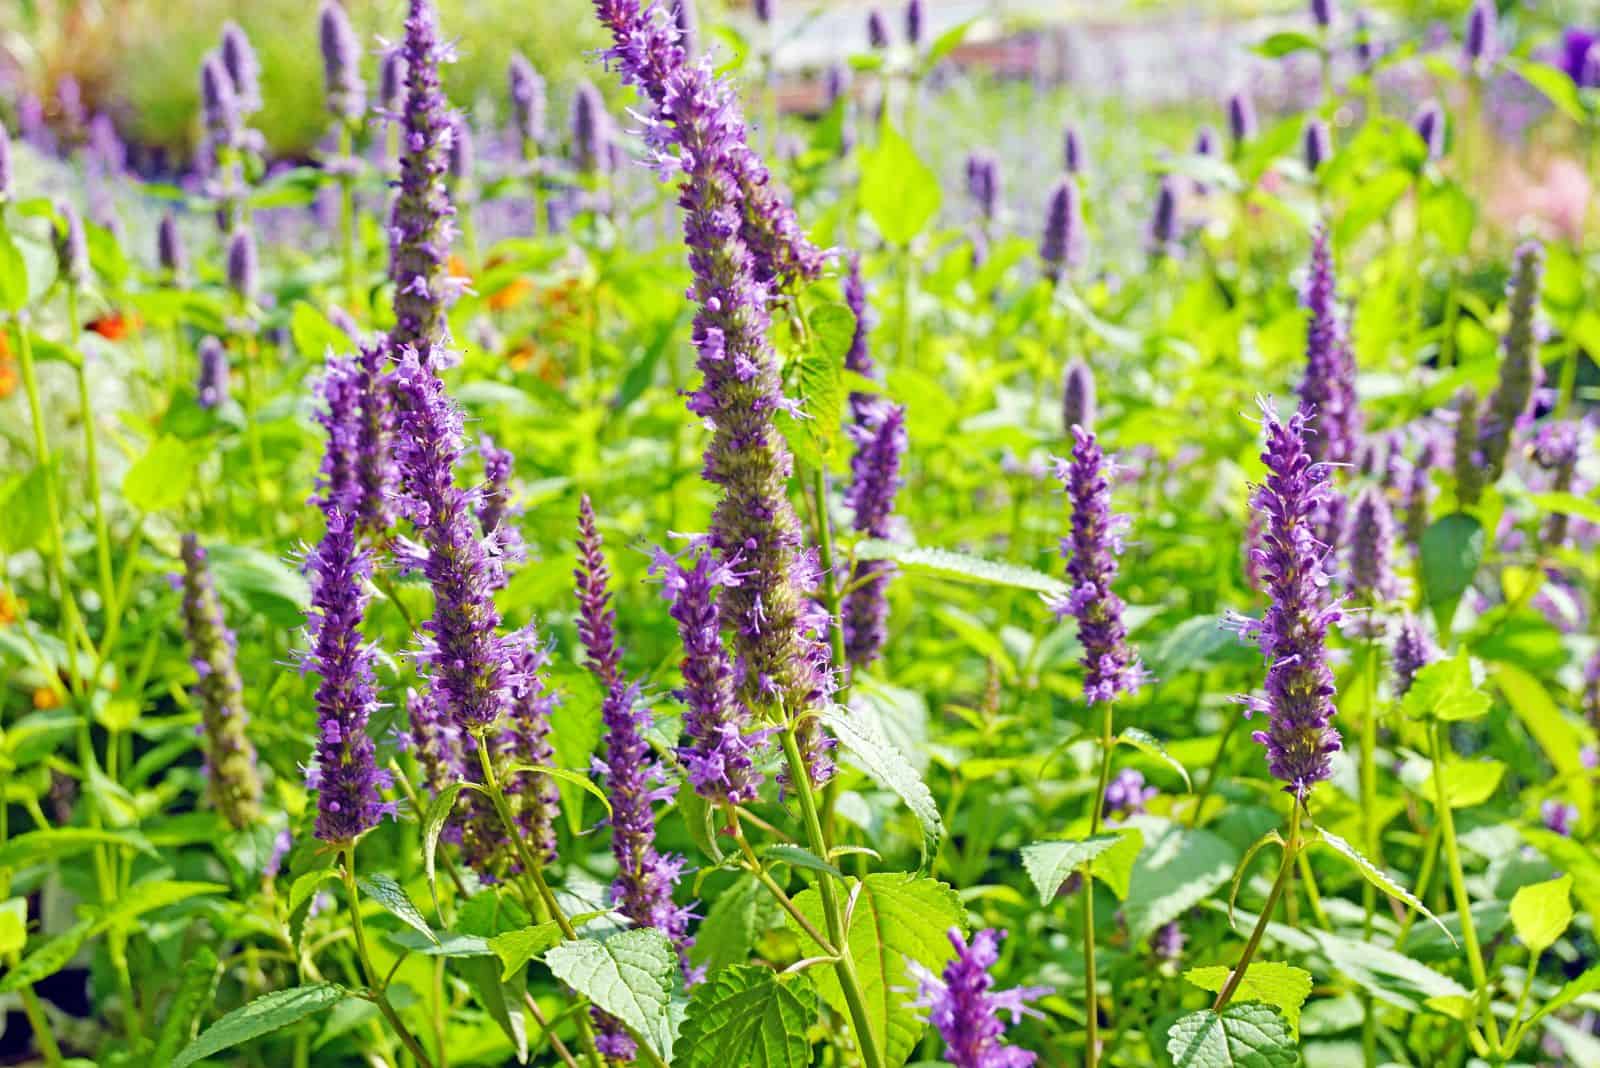 Anise Hyssop with purple flowers